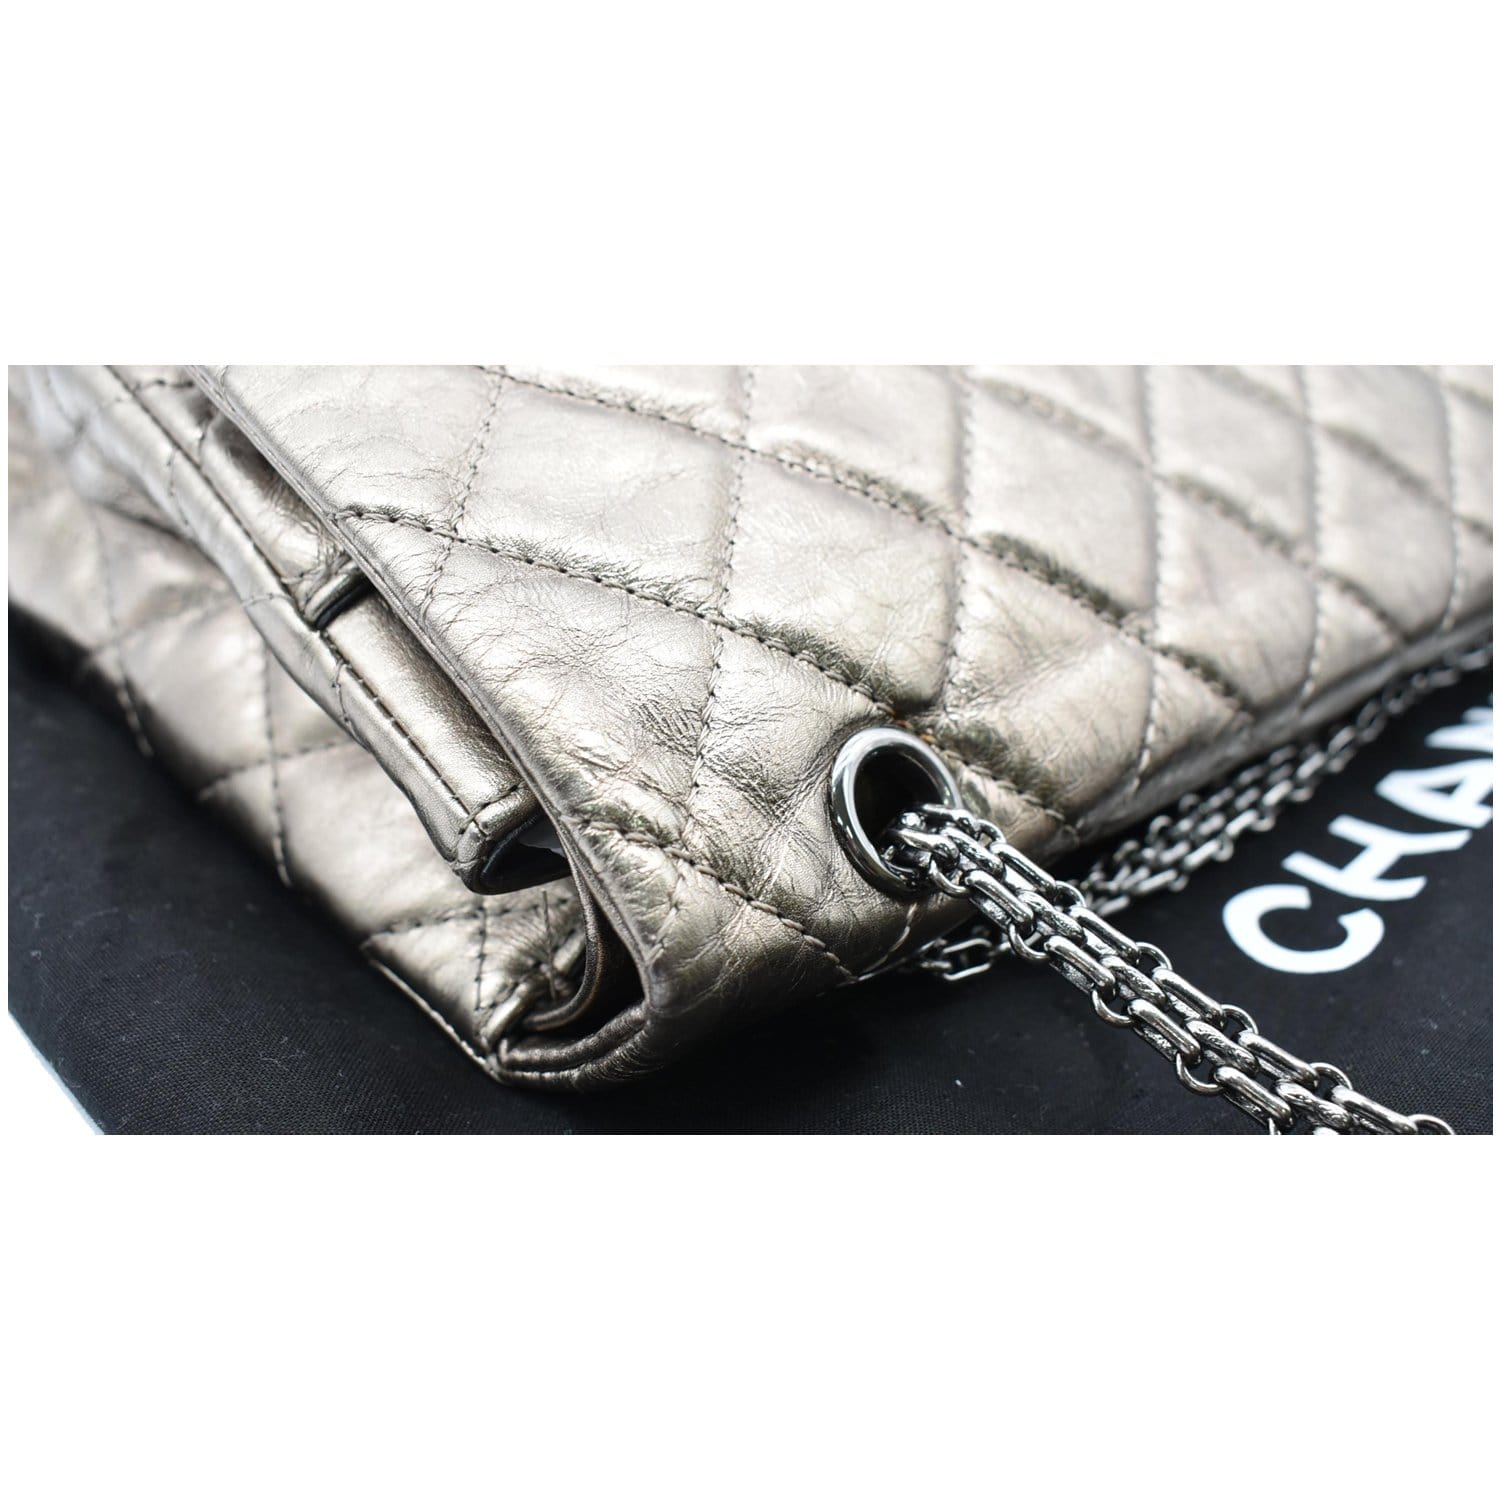 Chanel Black Quilted Aged Calfskin 2.55 Reissue Phone Case Gold Hardware, 2005 (Very Good), Womens Handbag